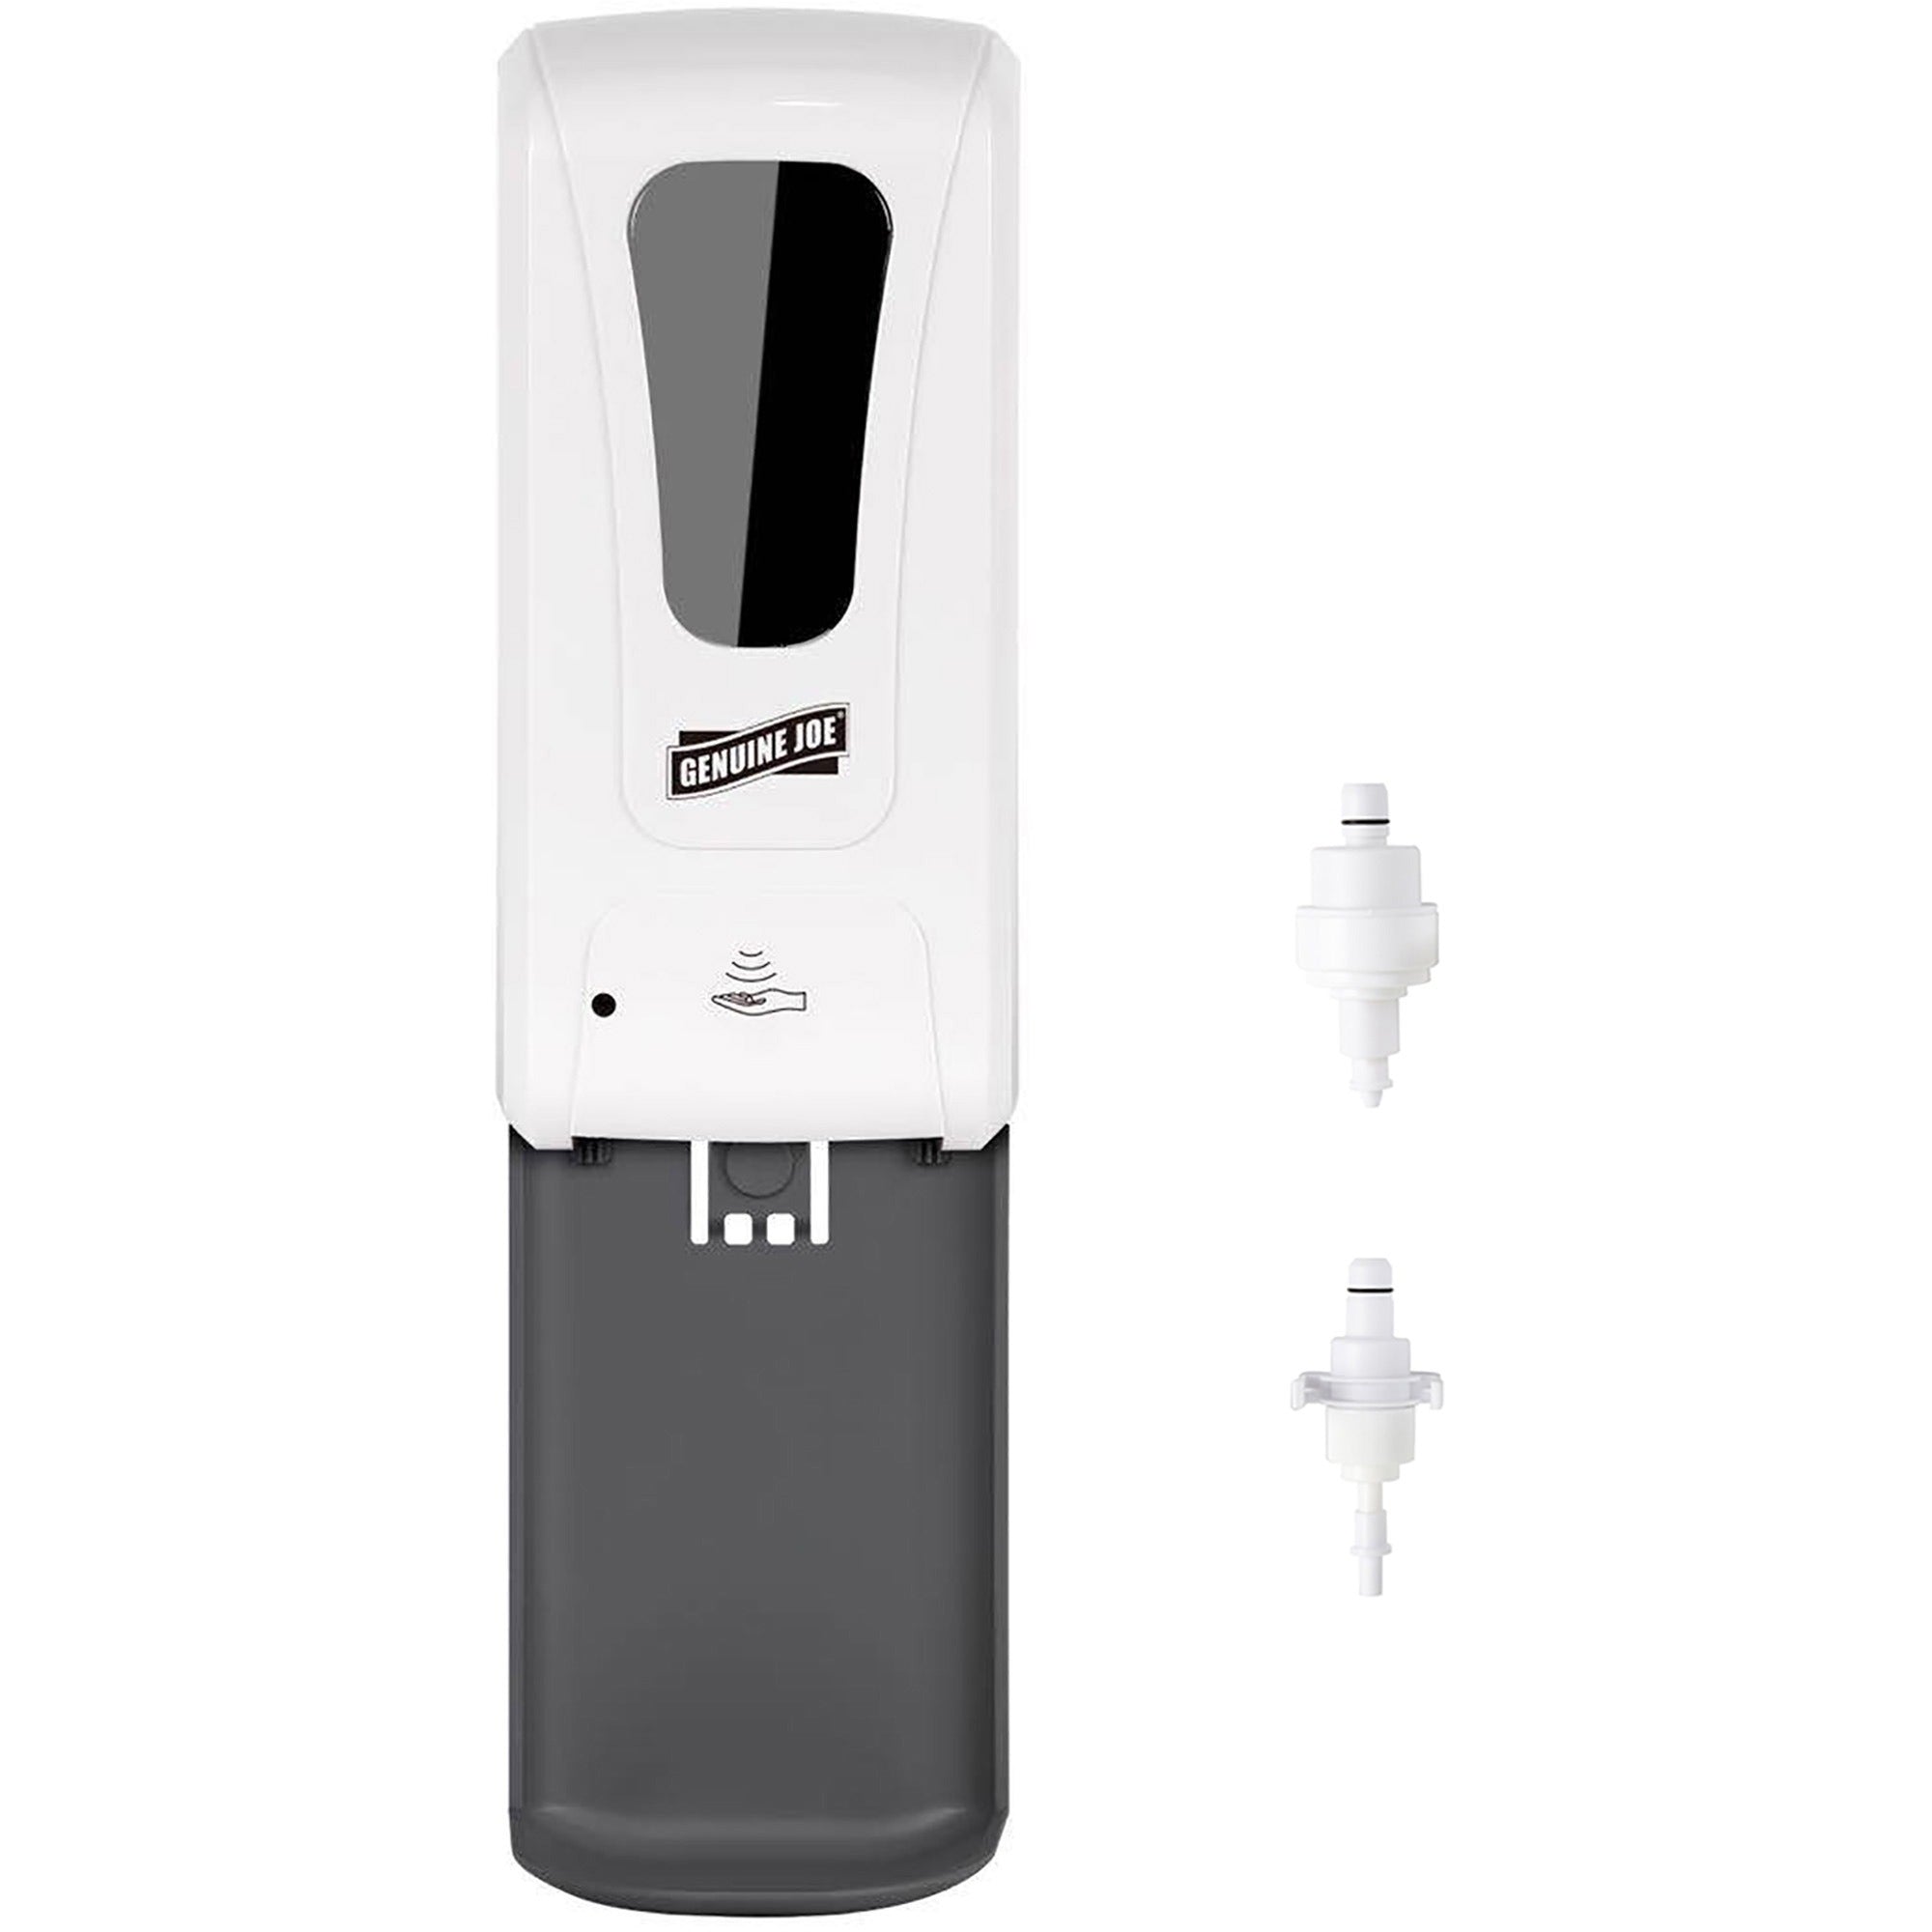 genuine-joe-3-nozzle-touch-free-dispenser-automatic-106-quart-capacity-support-4-x-c-battery-touch-free-lockable-level-indicator-site-window-drip-free-refillable-white-1each_gjo01404 - 1